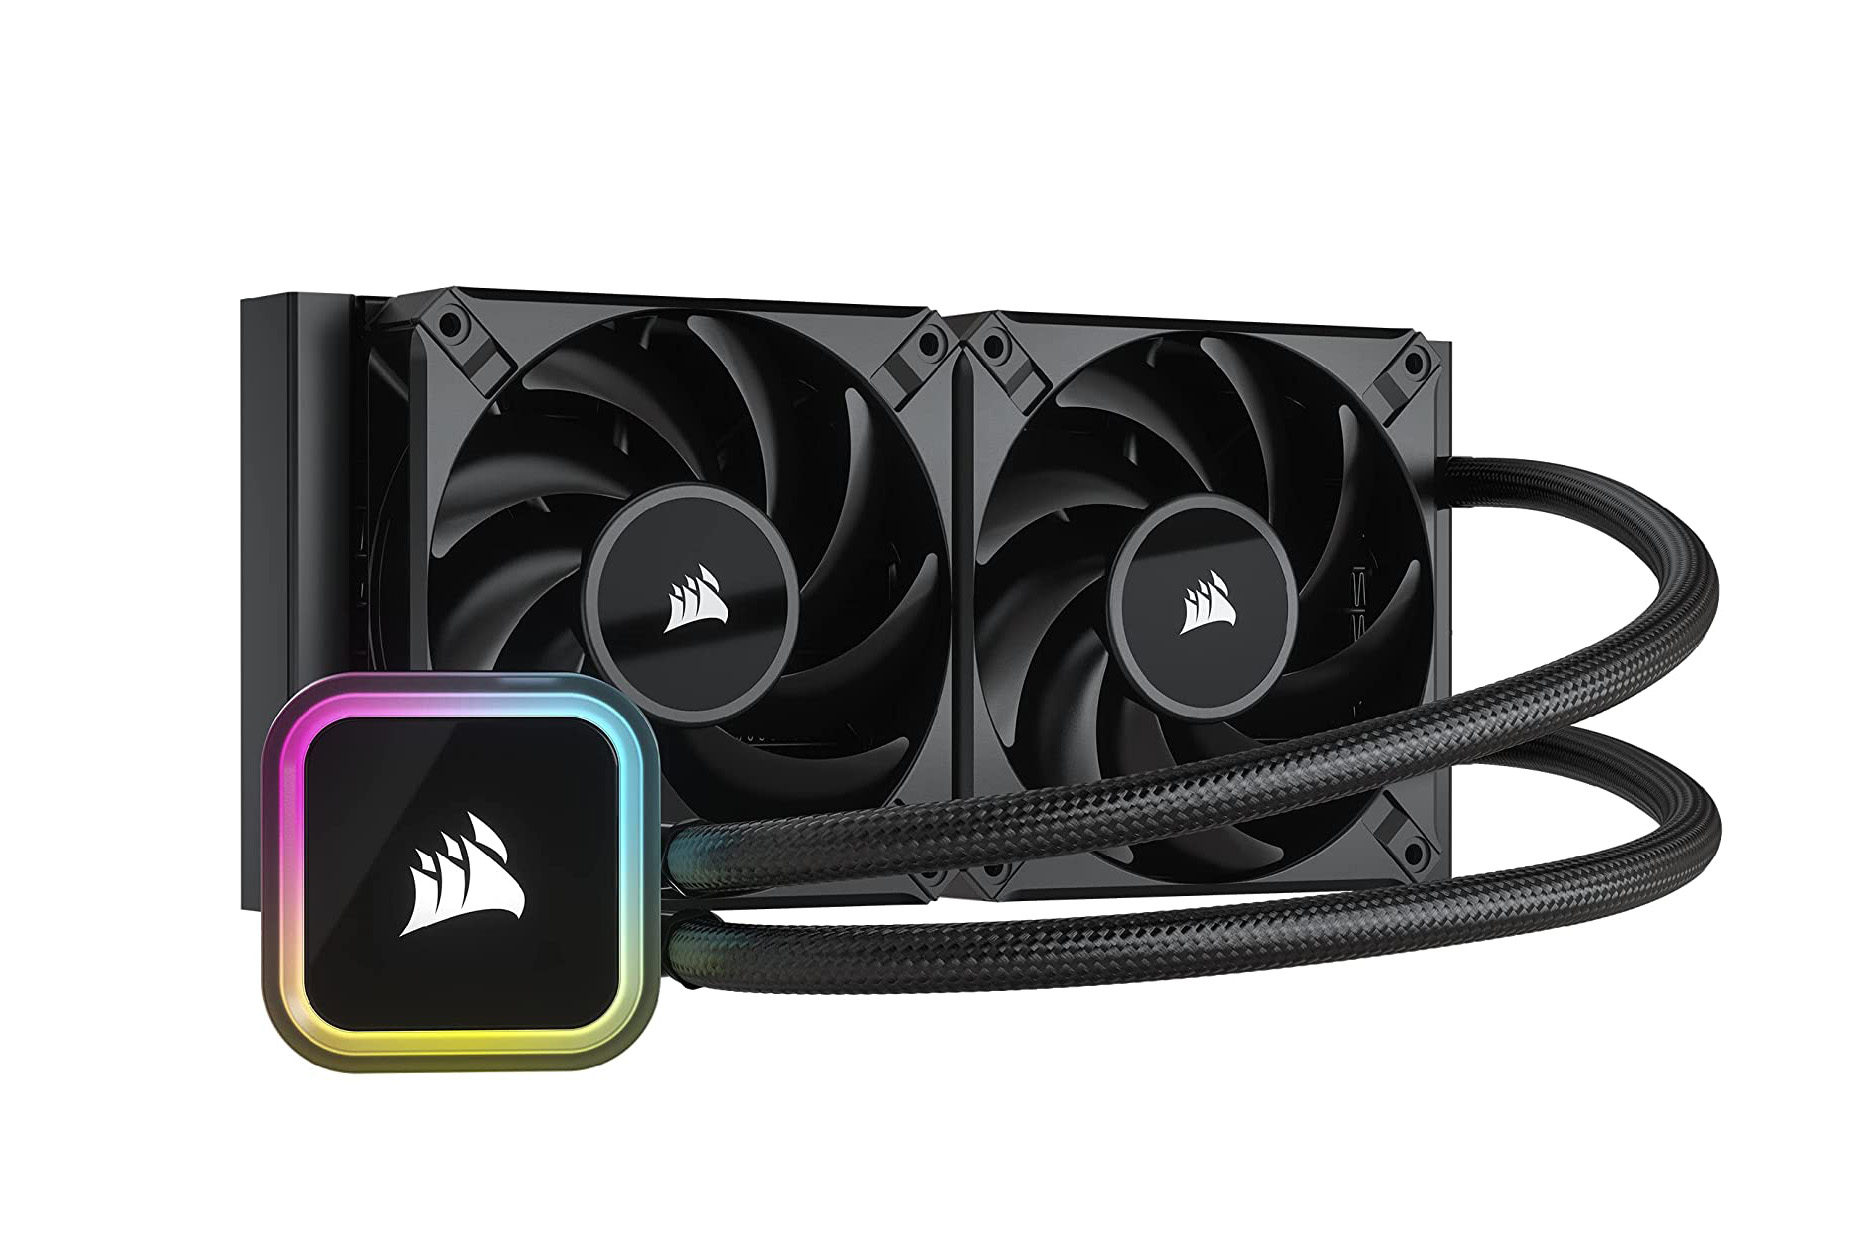 AIO vs Air Cooled Video Cards worth the extra cost? 